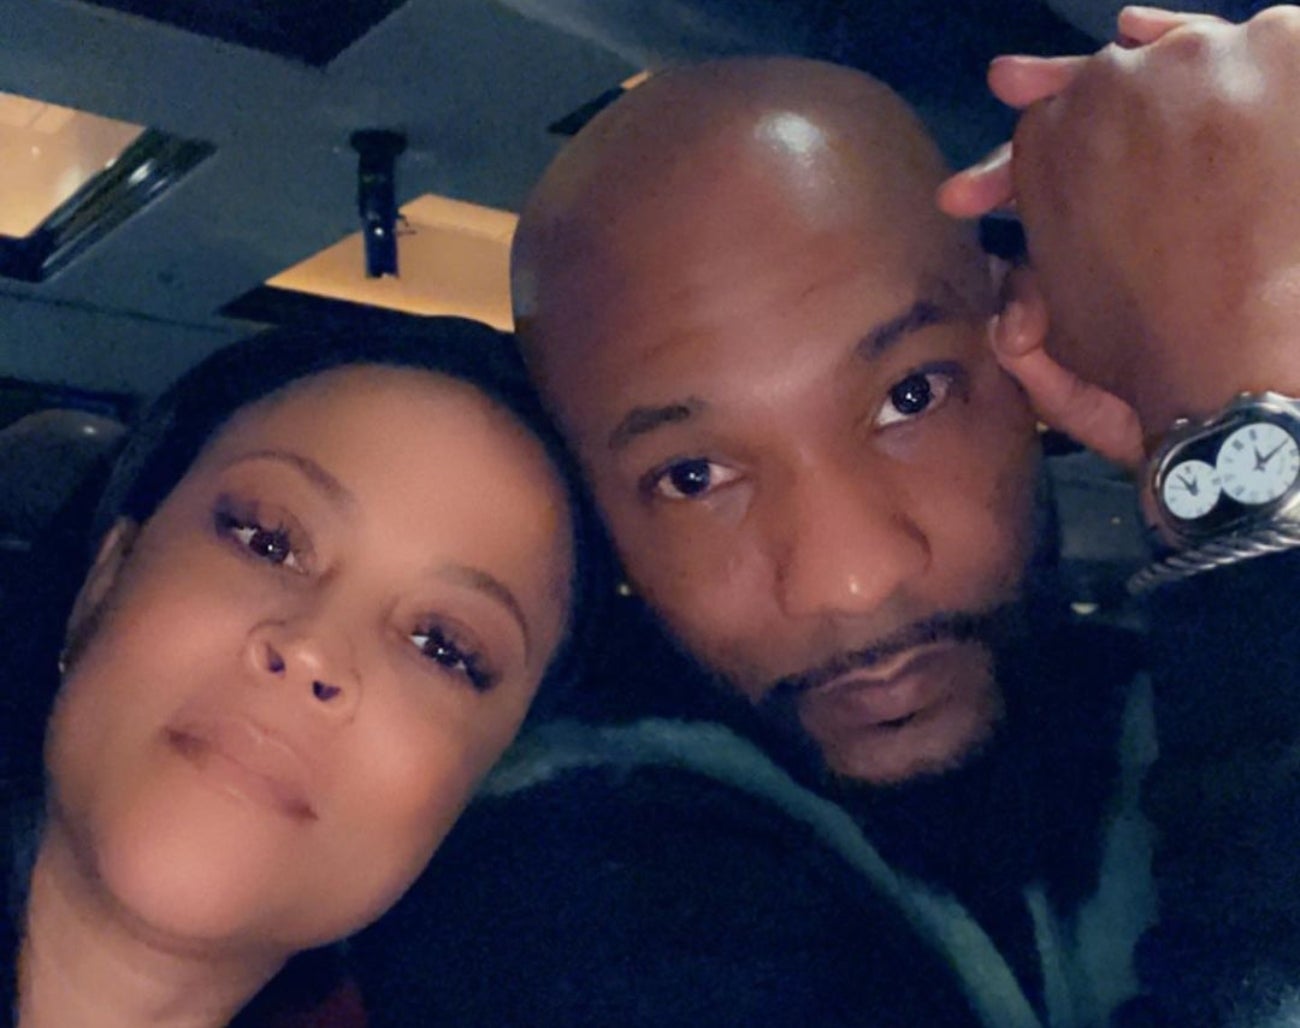 Shaunie O'Neal Has Found Love Again: 'You’ve Become My Safe Place'